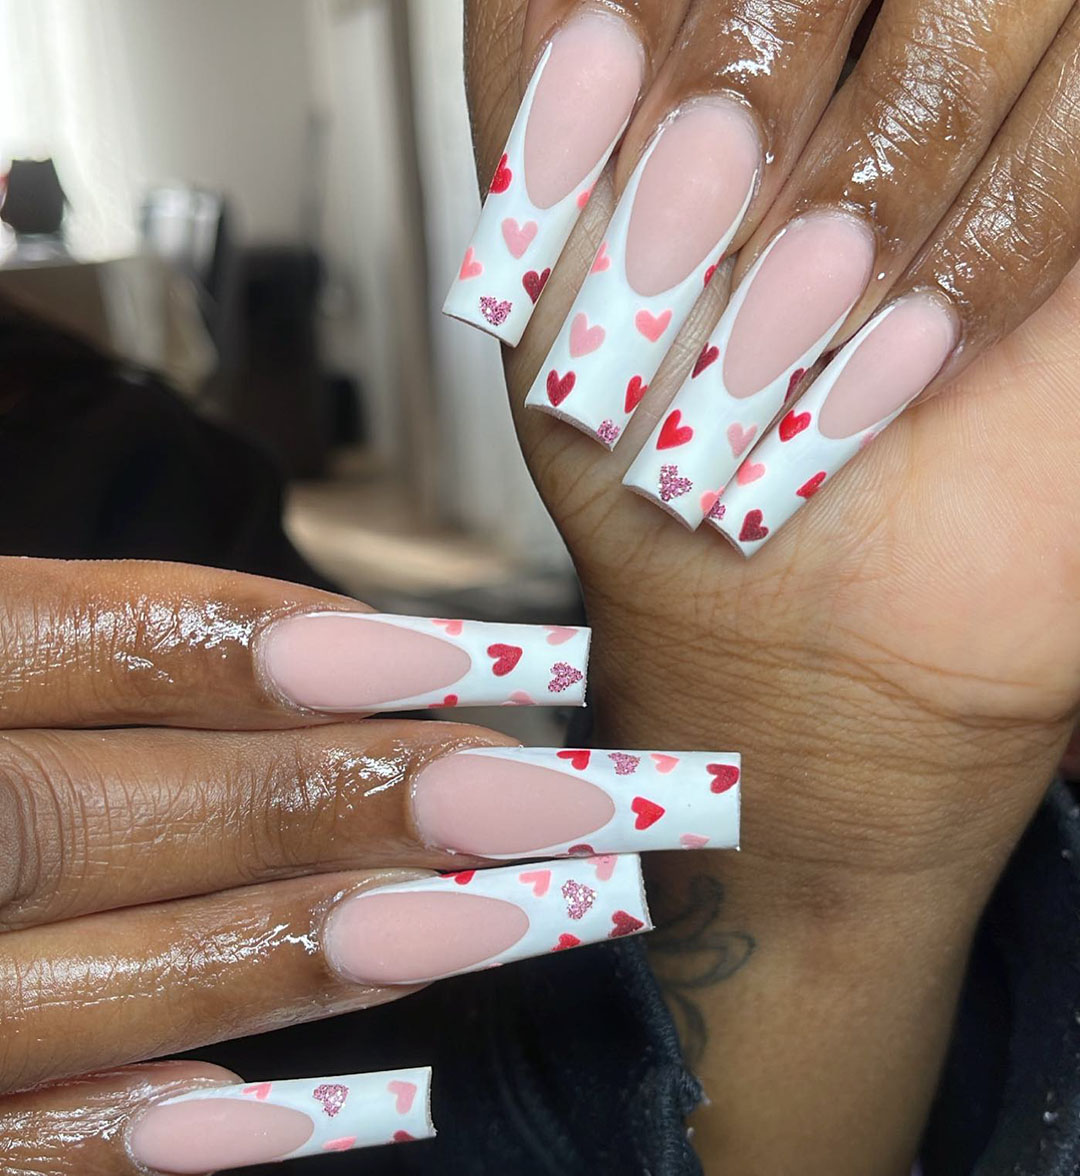 nail art with checkered hearts design.